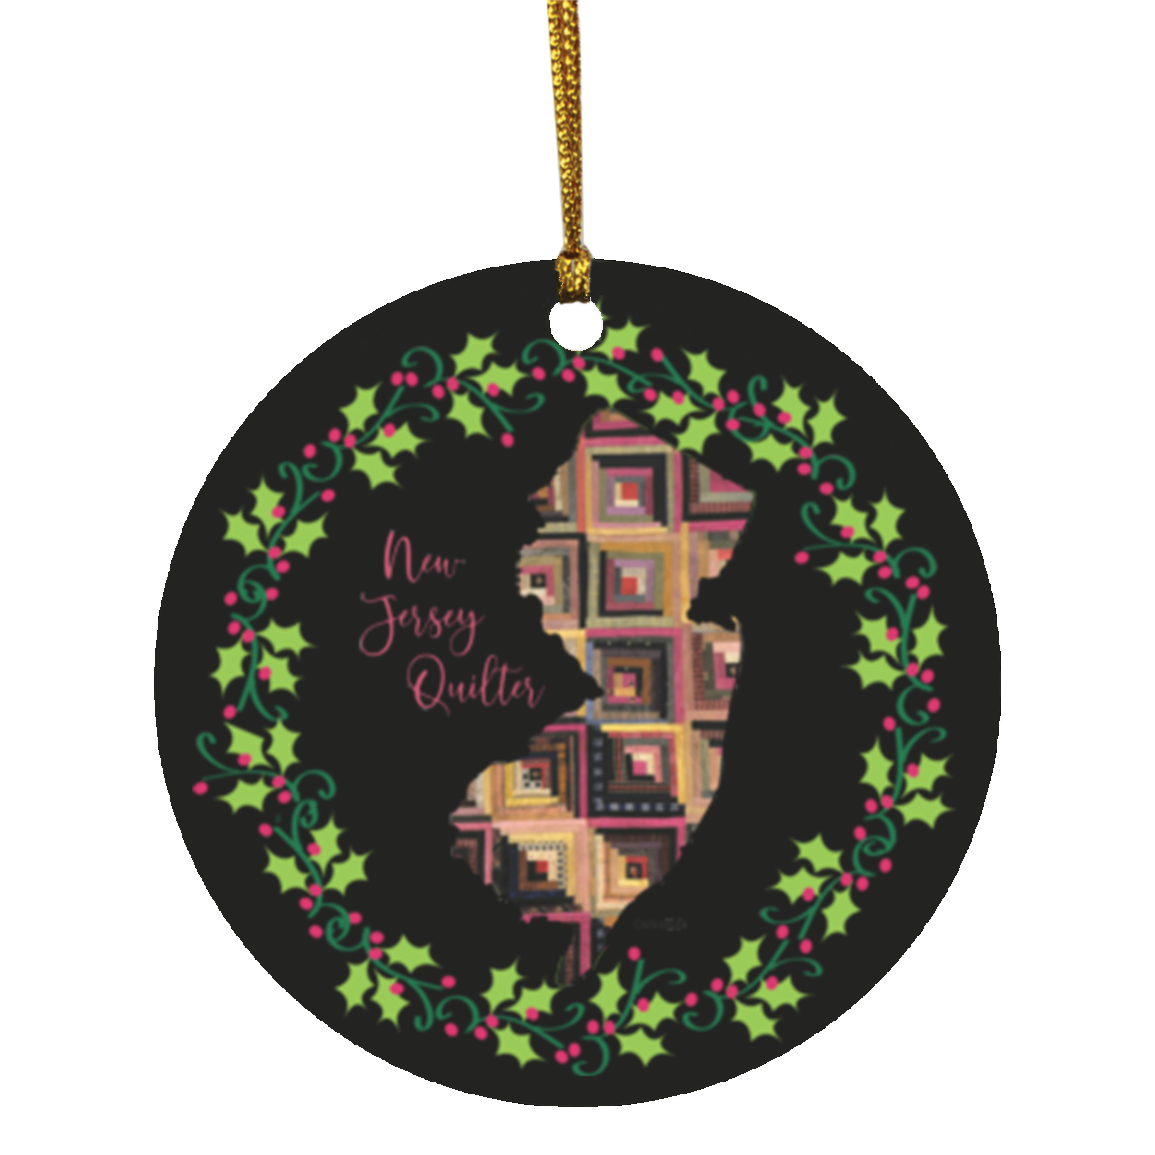 New Jersey Quilter Christmas Circle Ornament